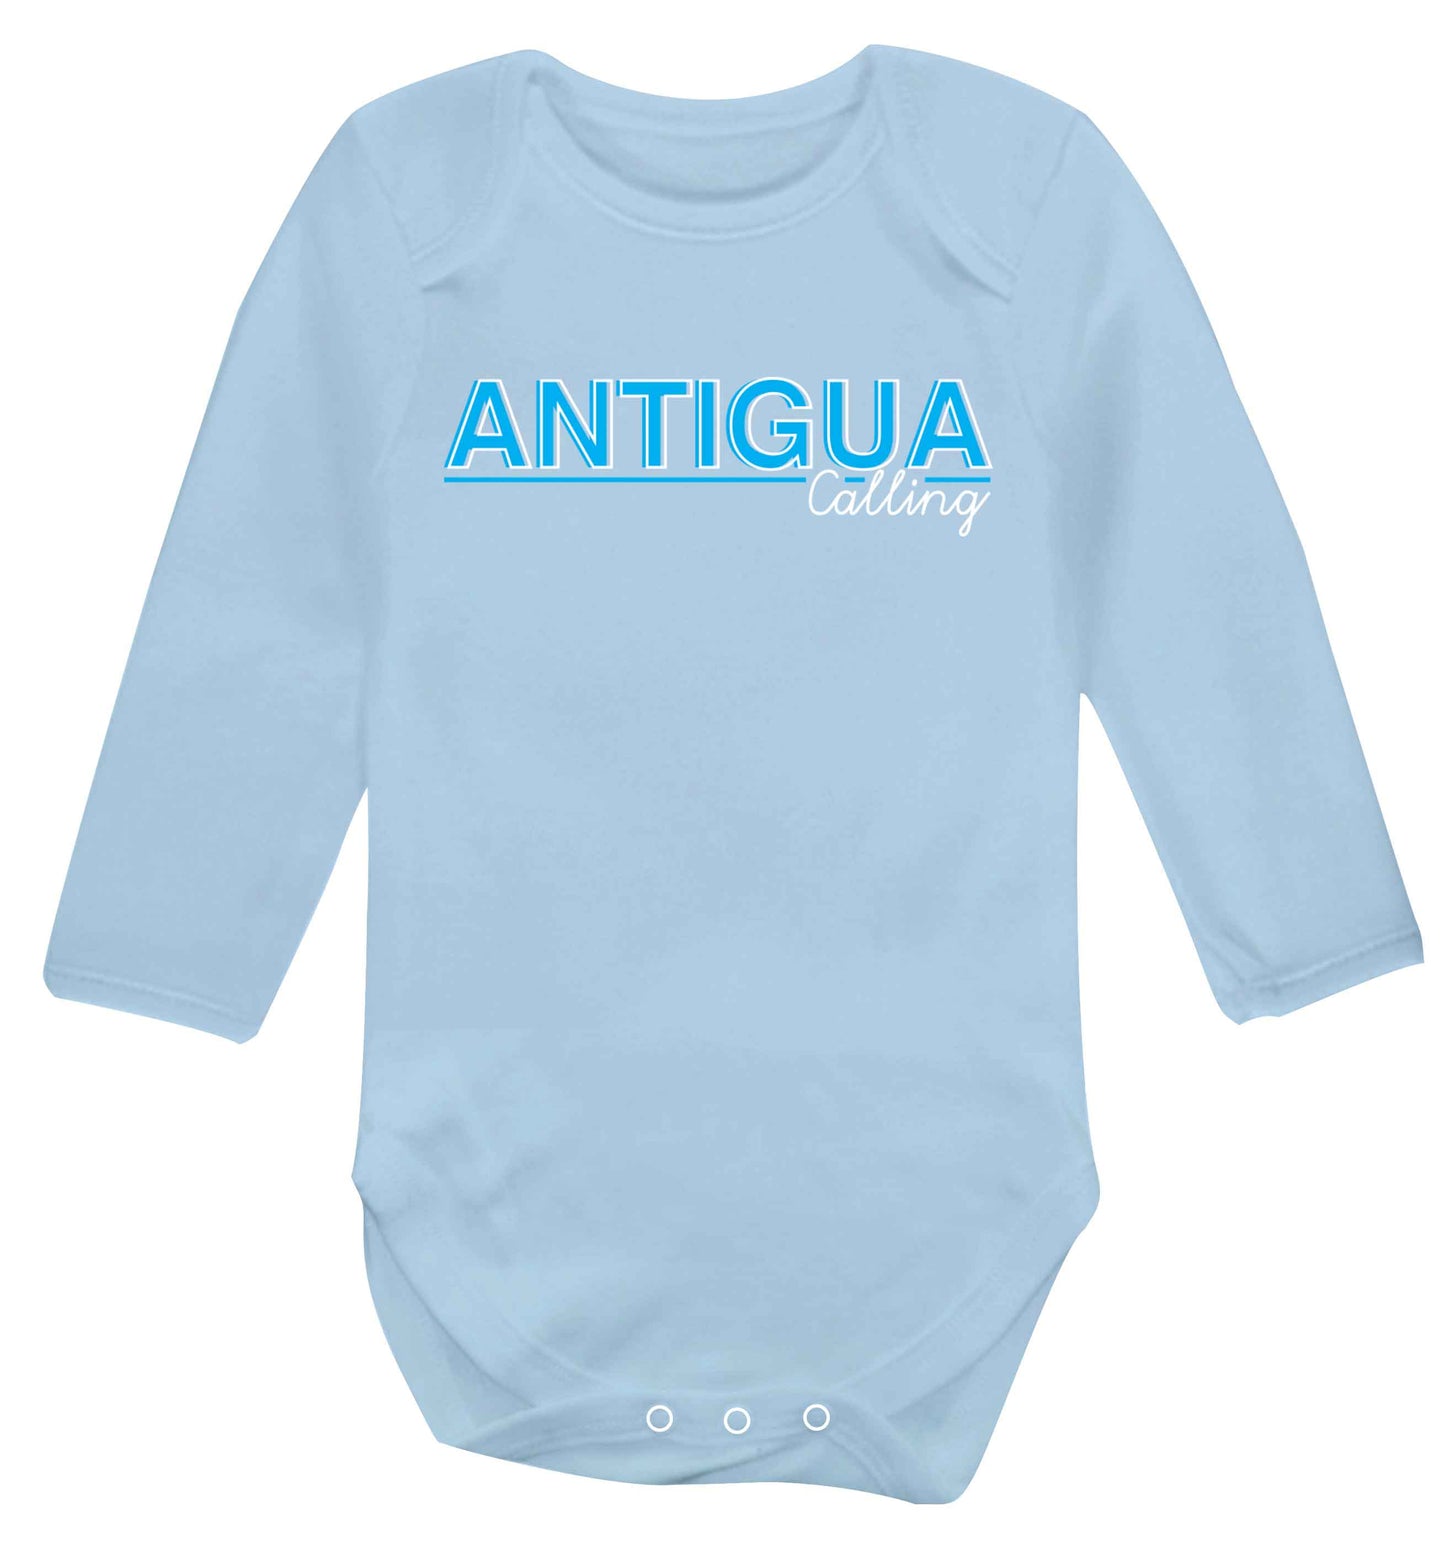 Antigua calling Baby Vest long sleeved pale blue 6-12 months